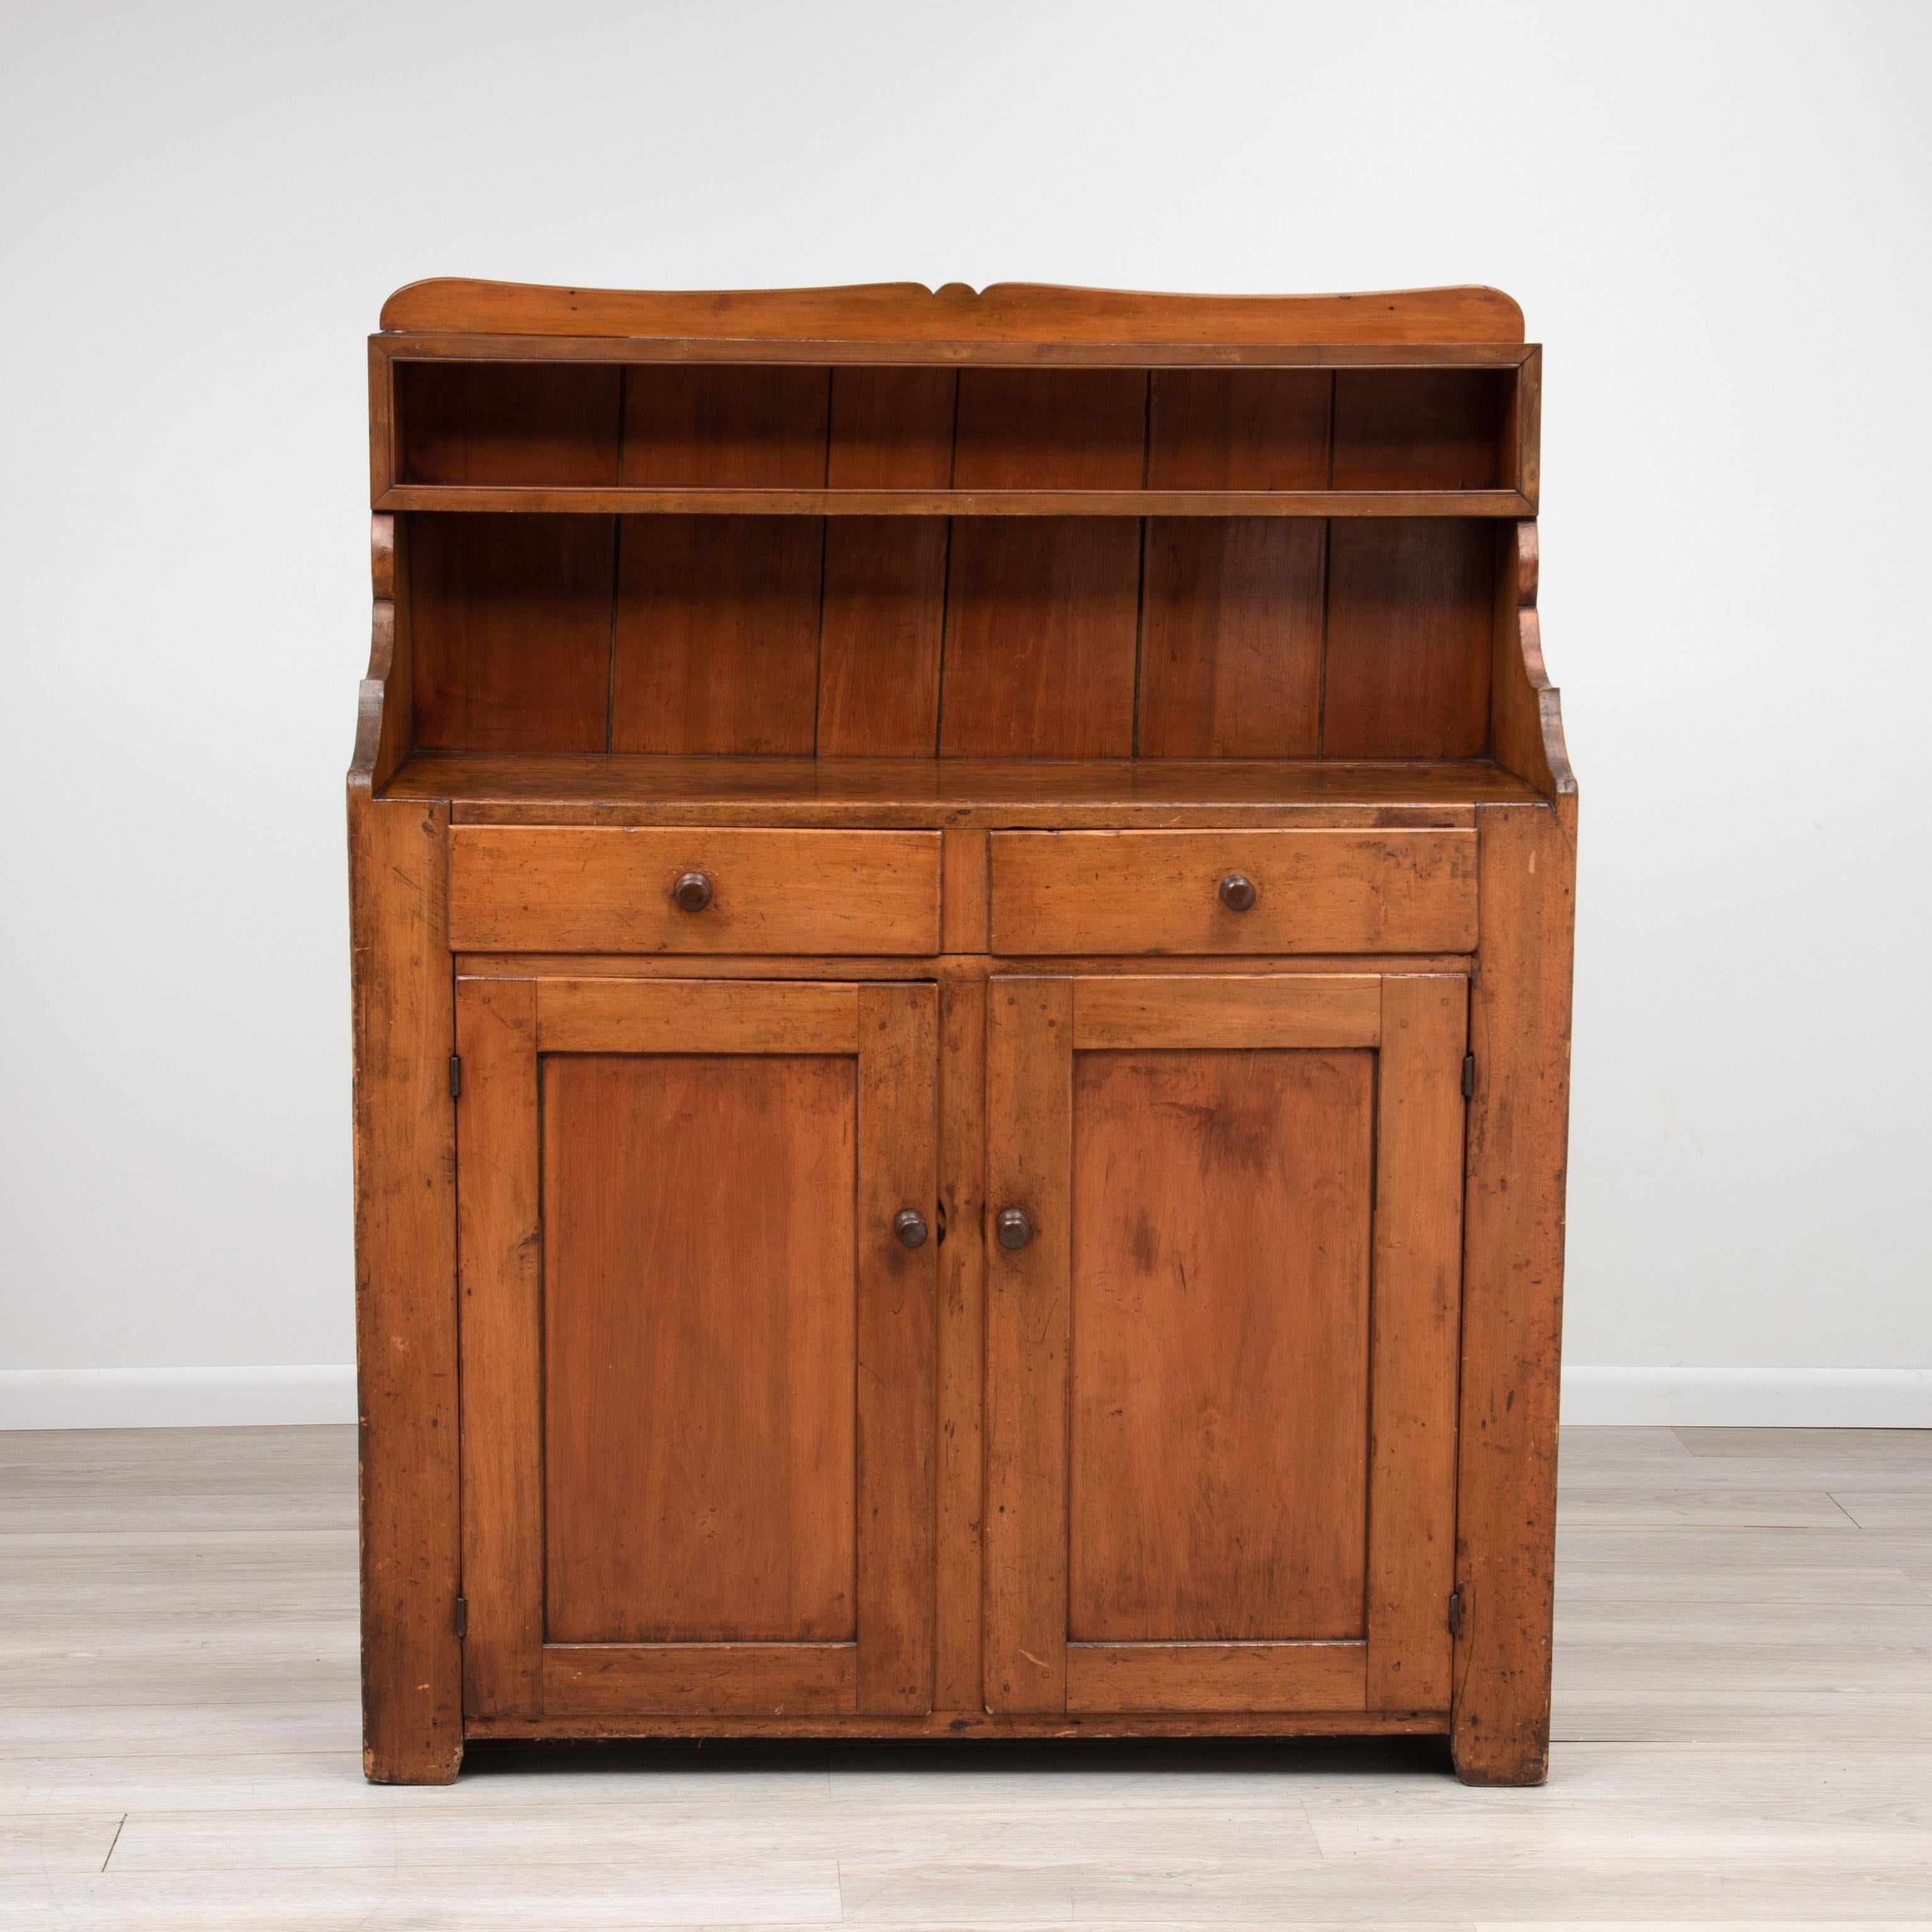 A Pennsylvania step back pine jelly cupboard with a fantastic patina. The work shelf is 41” tall...

A solid large stately piece, with great storage. Perfect for a country farmhouse style kitchen, or display in your living space. 